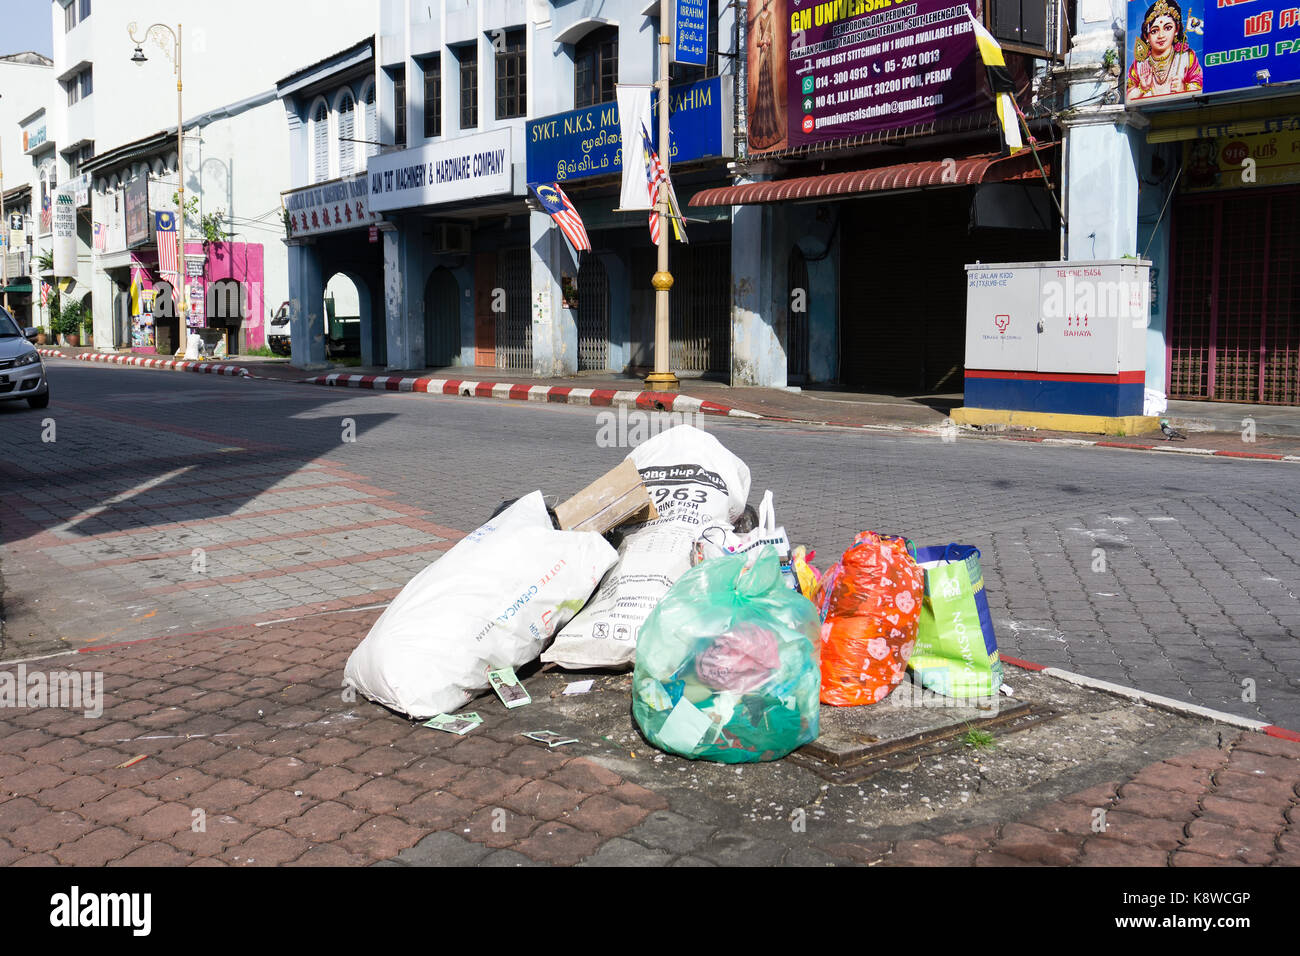 Ipoh, Malaysia - September 17, 2017: Rubbish at the roadside in Ipoh, capital city of Perak. Stock Photo